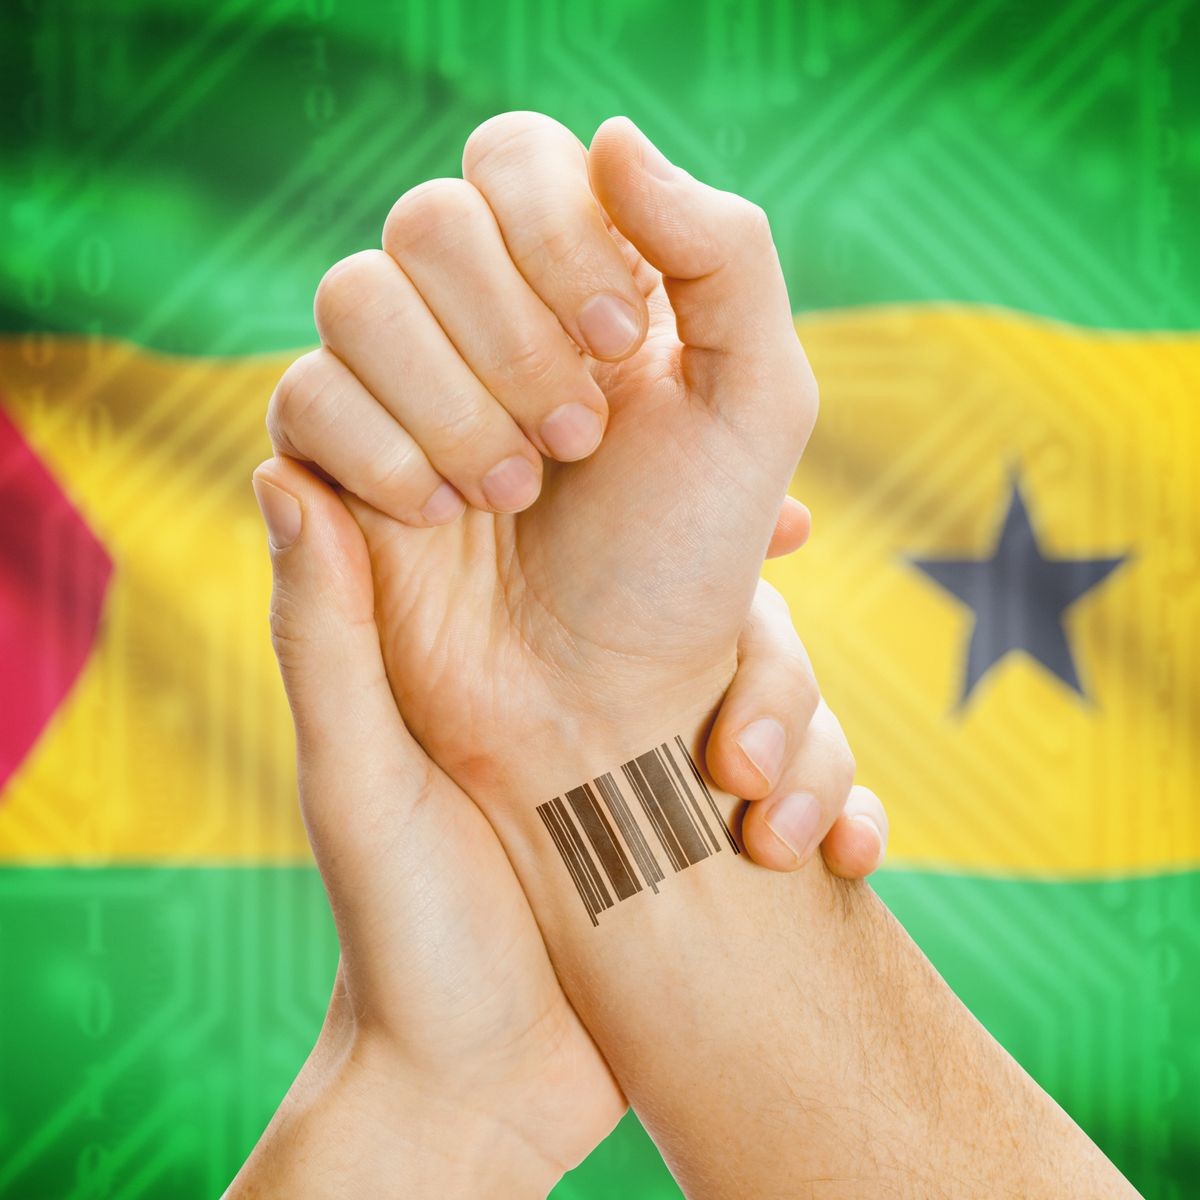 Barcode ID number on wrist of a human and national flag on background series - Sao Tome and Principe